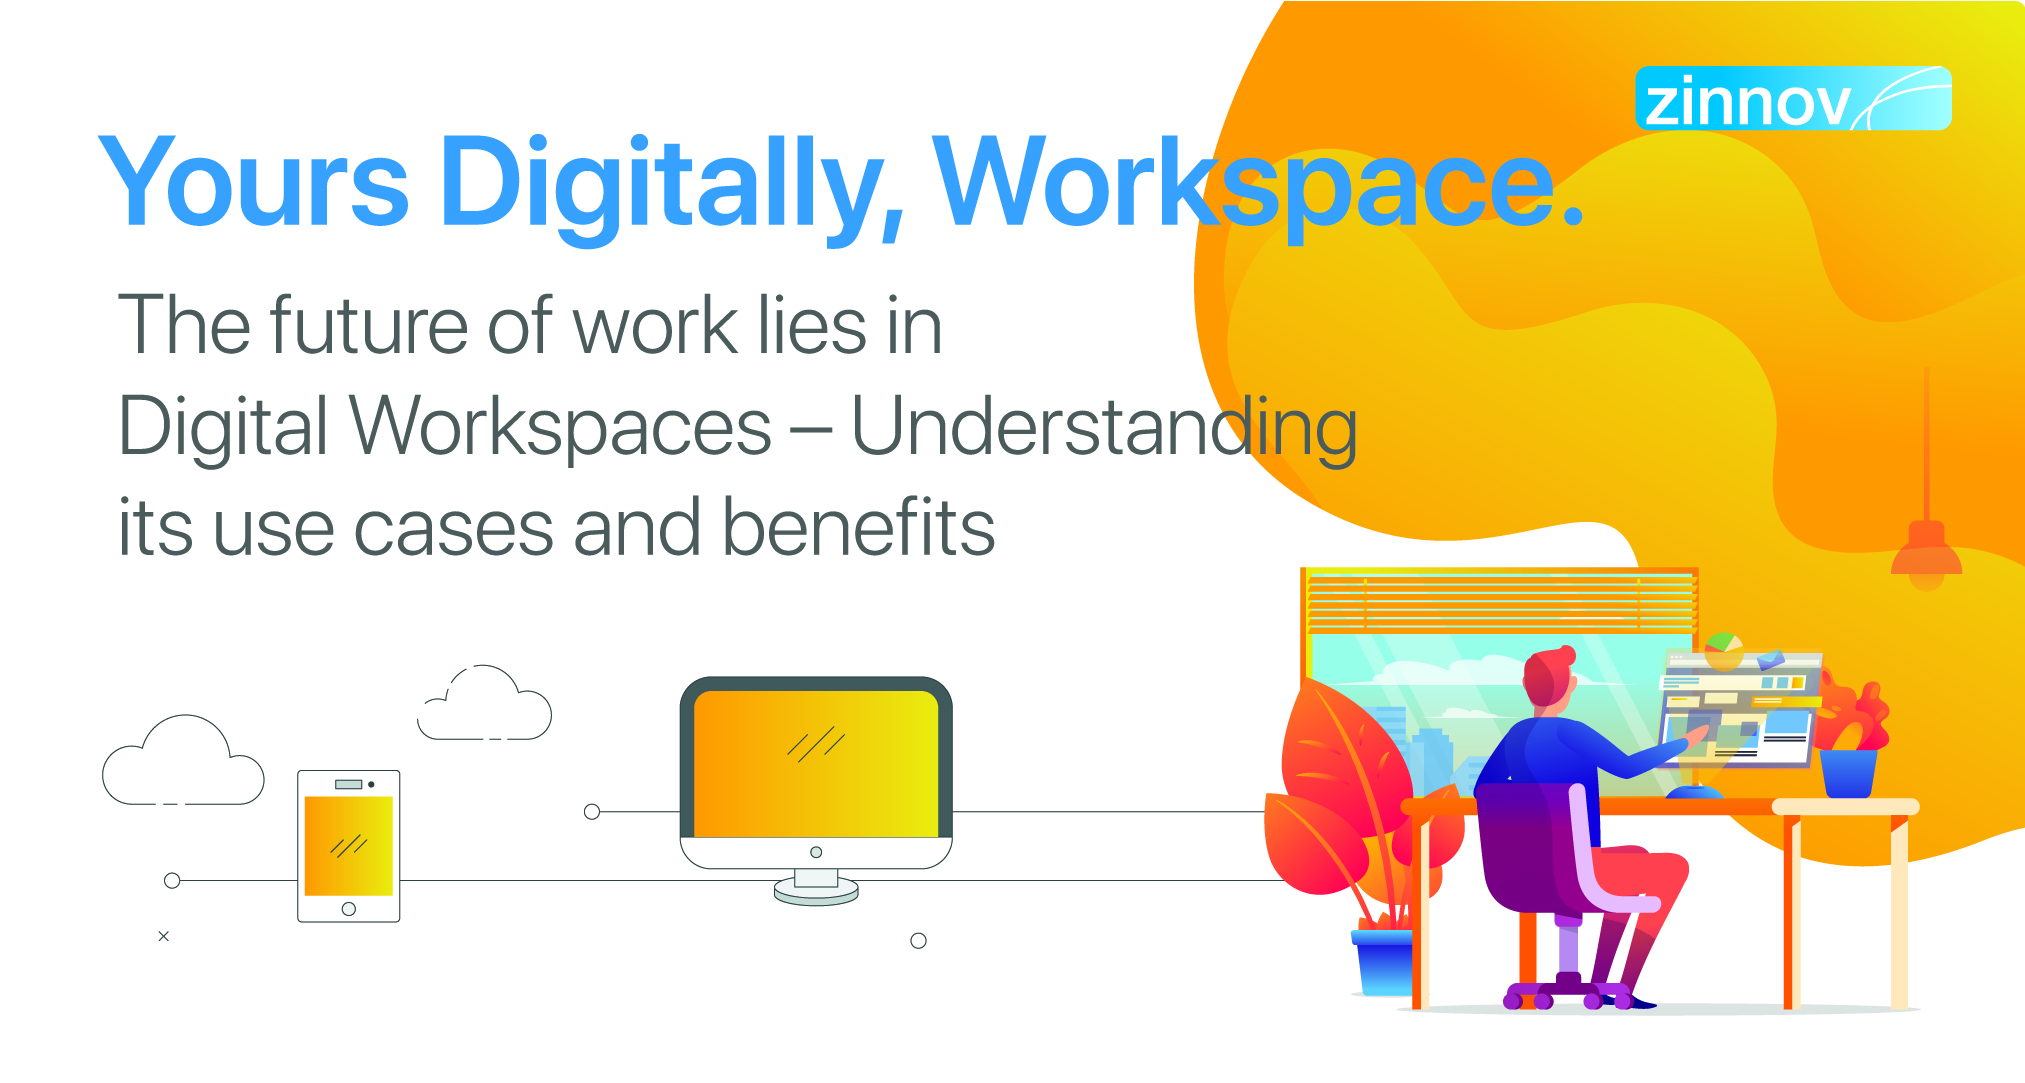 Digital Workplace Use Cases and Benefits